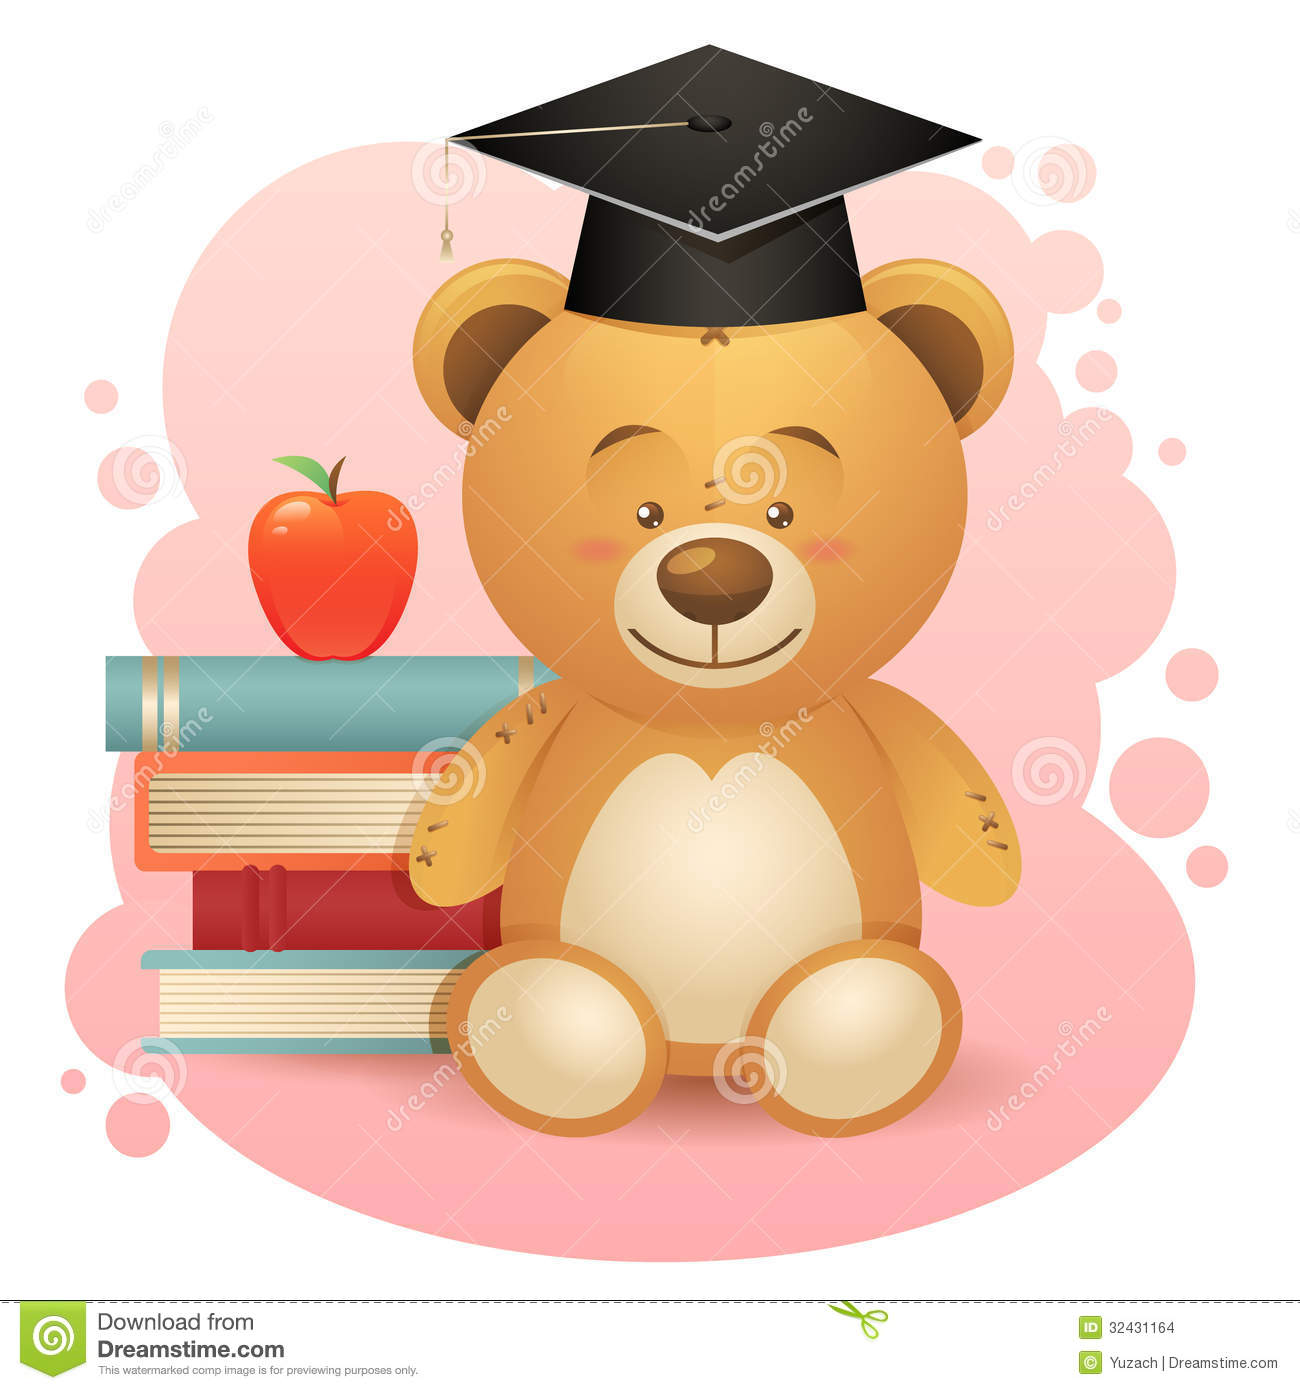 Back To School Cute Teddy Bear Toy Illustration Stock Images   Image